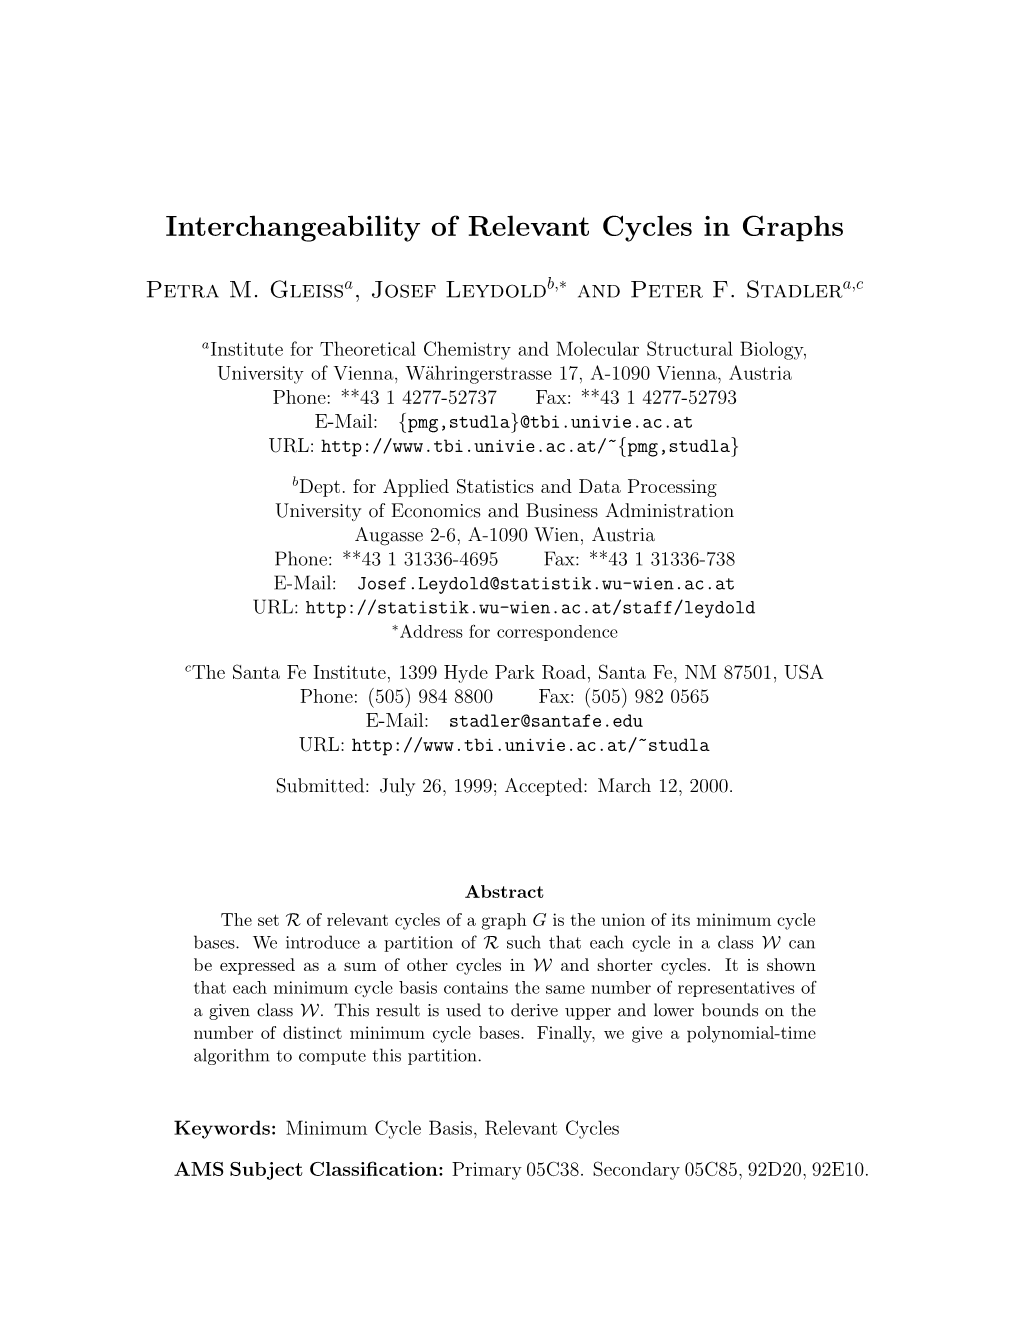 Interchangeability of Relevant Cycles in Graphs